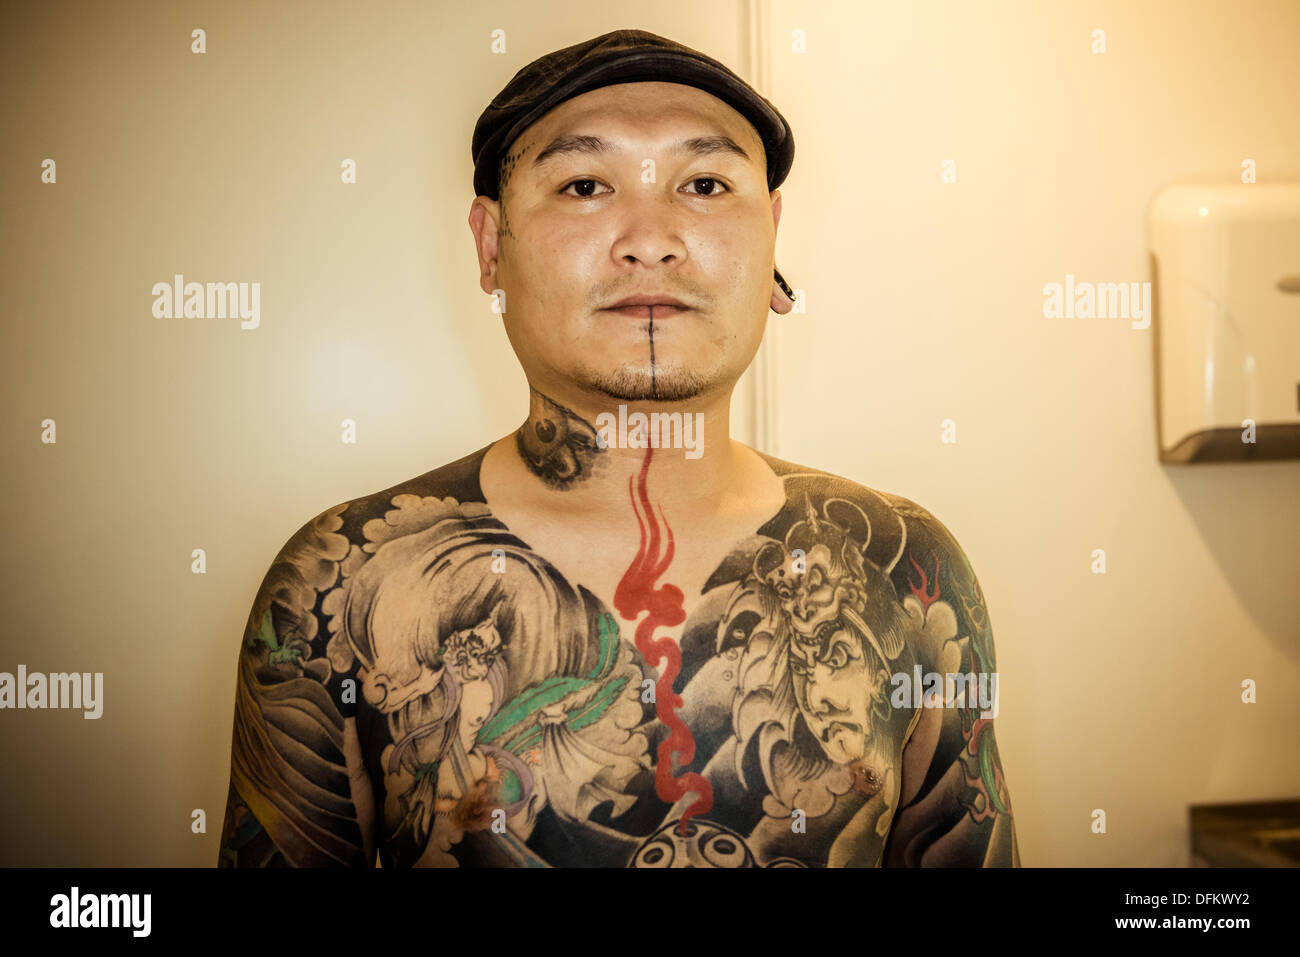 Barcelona, Spain. 6th Oct, 2013: Tattoo artist Hua from East Tattoo Taiwan poses for a photo at the 16th International Barcelona Tattoo Expo. Credit:  matthi/Alamy Live News Stock Photo